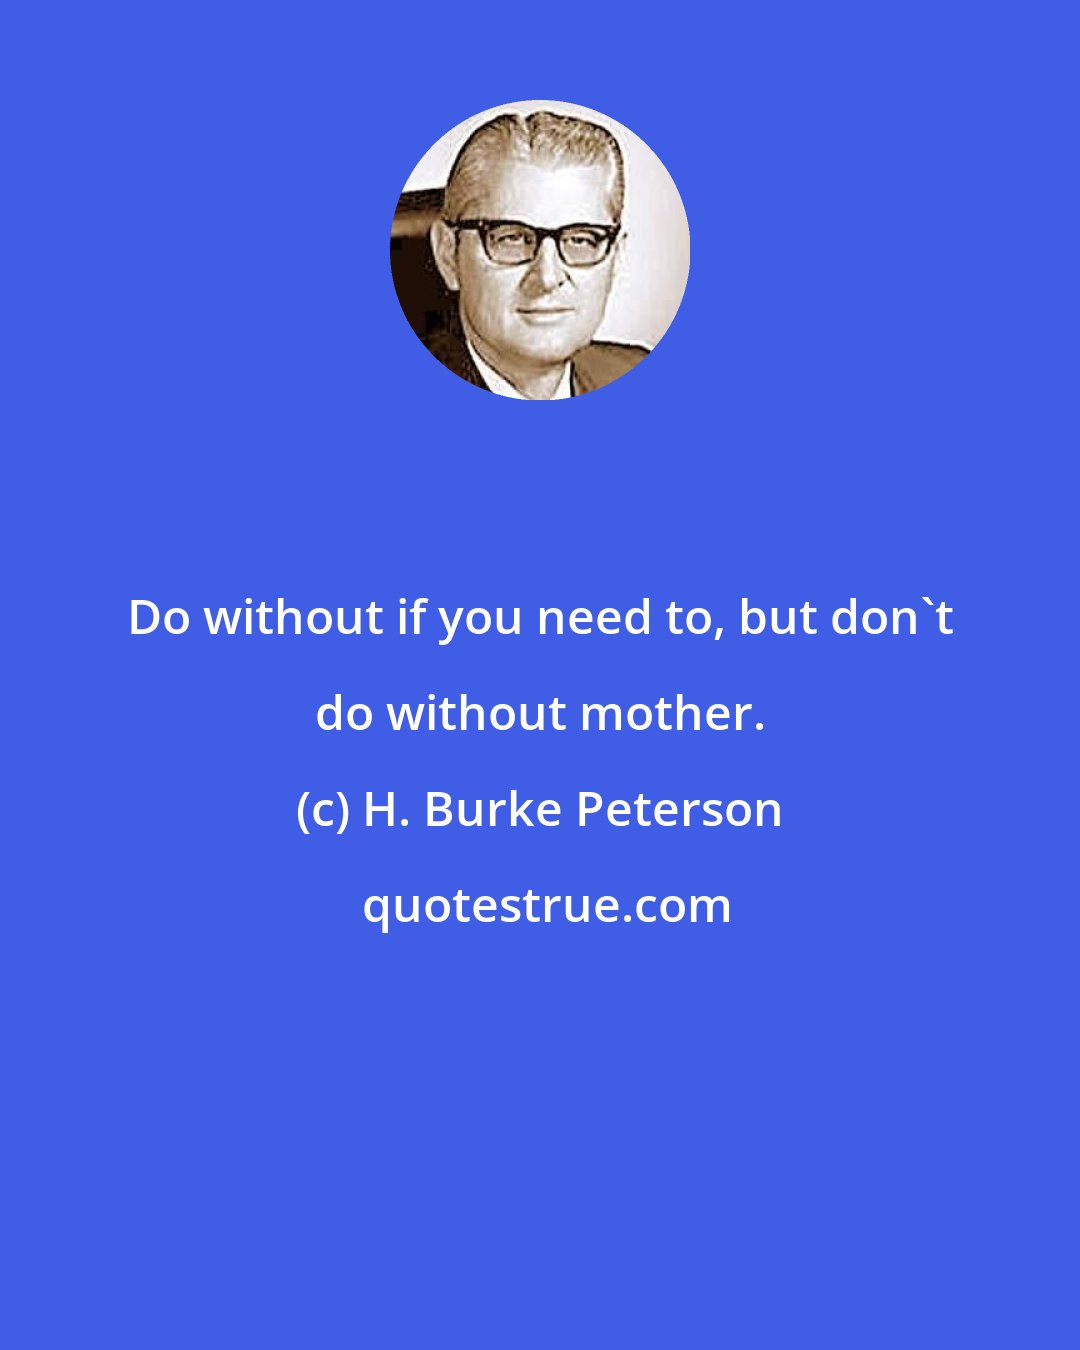 H. Burke Peterson: Do without if you need to, but don't do without mother.